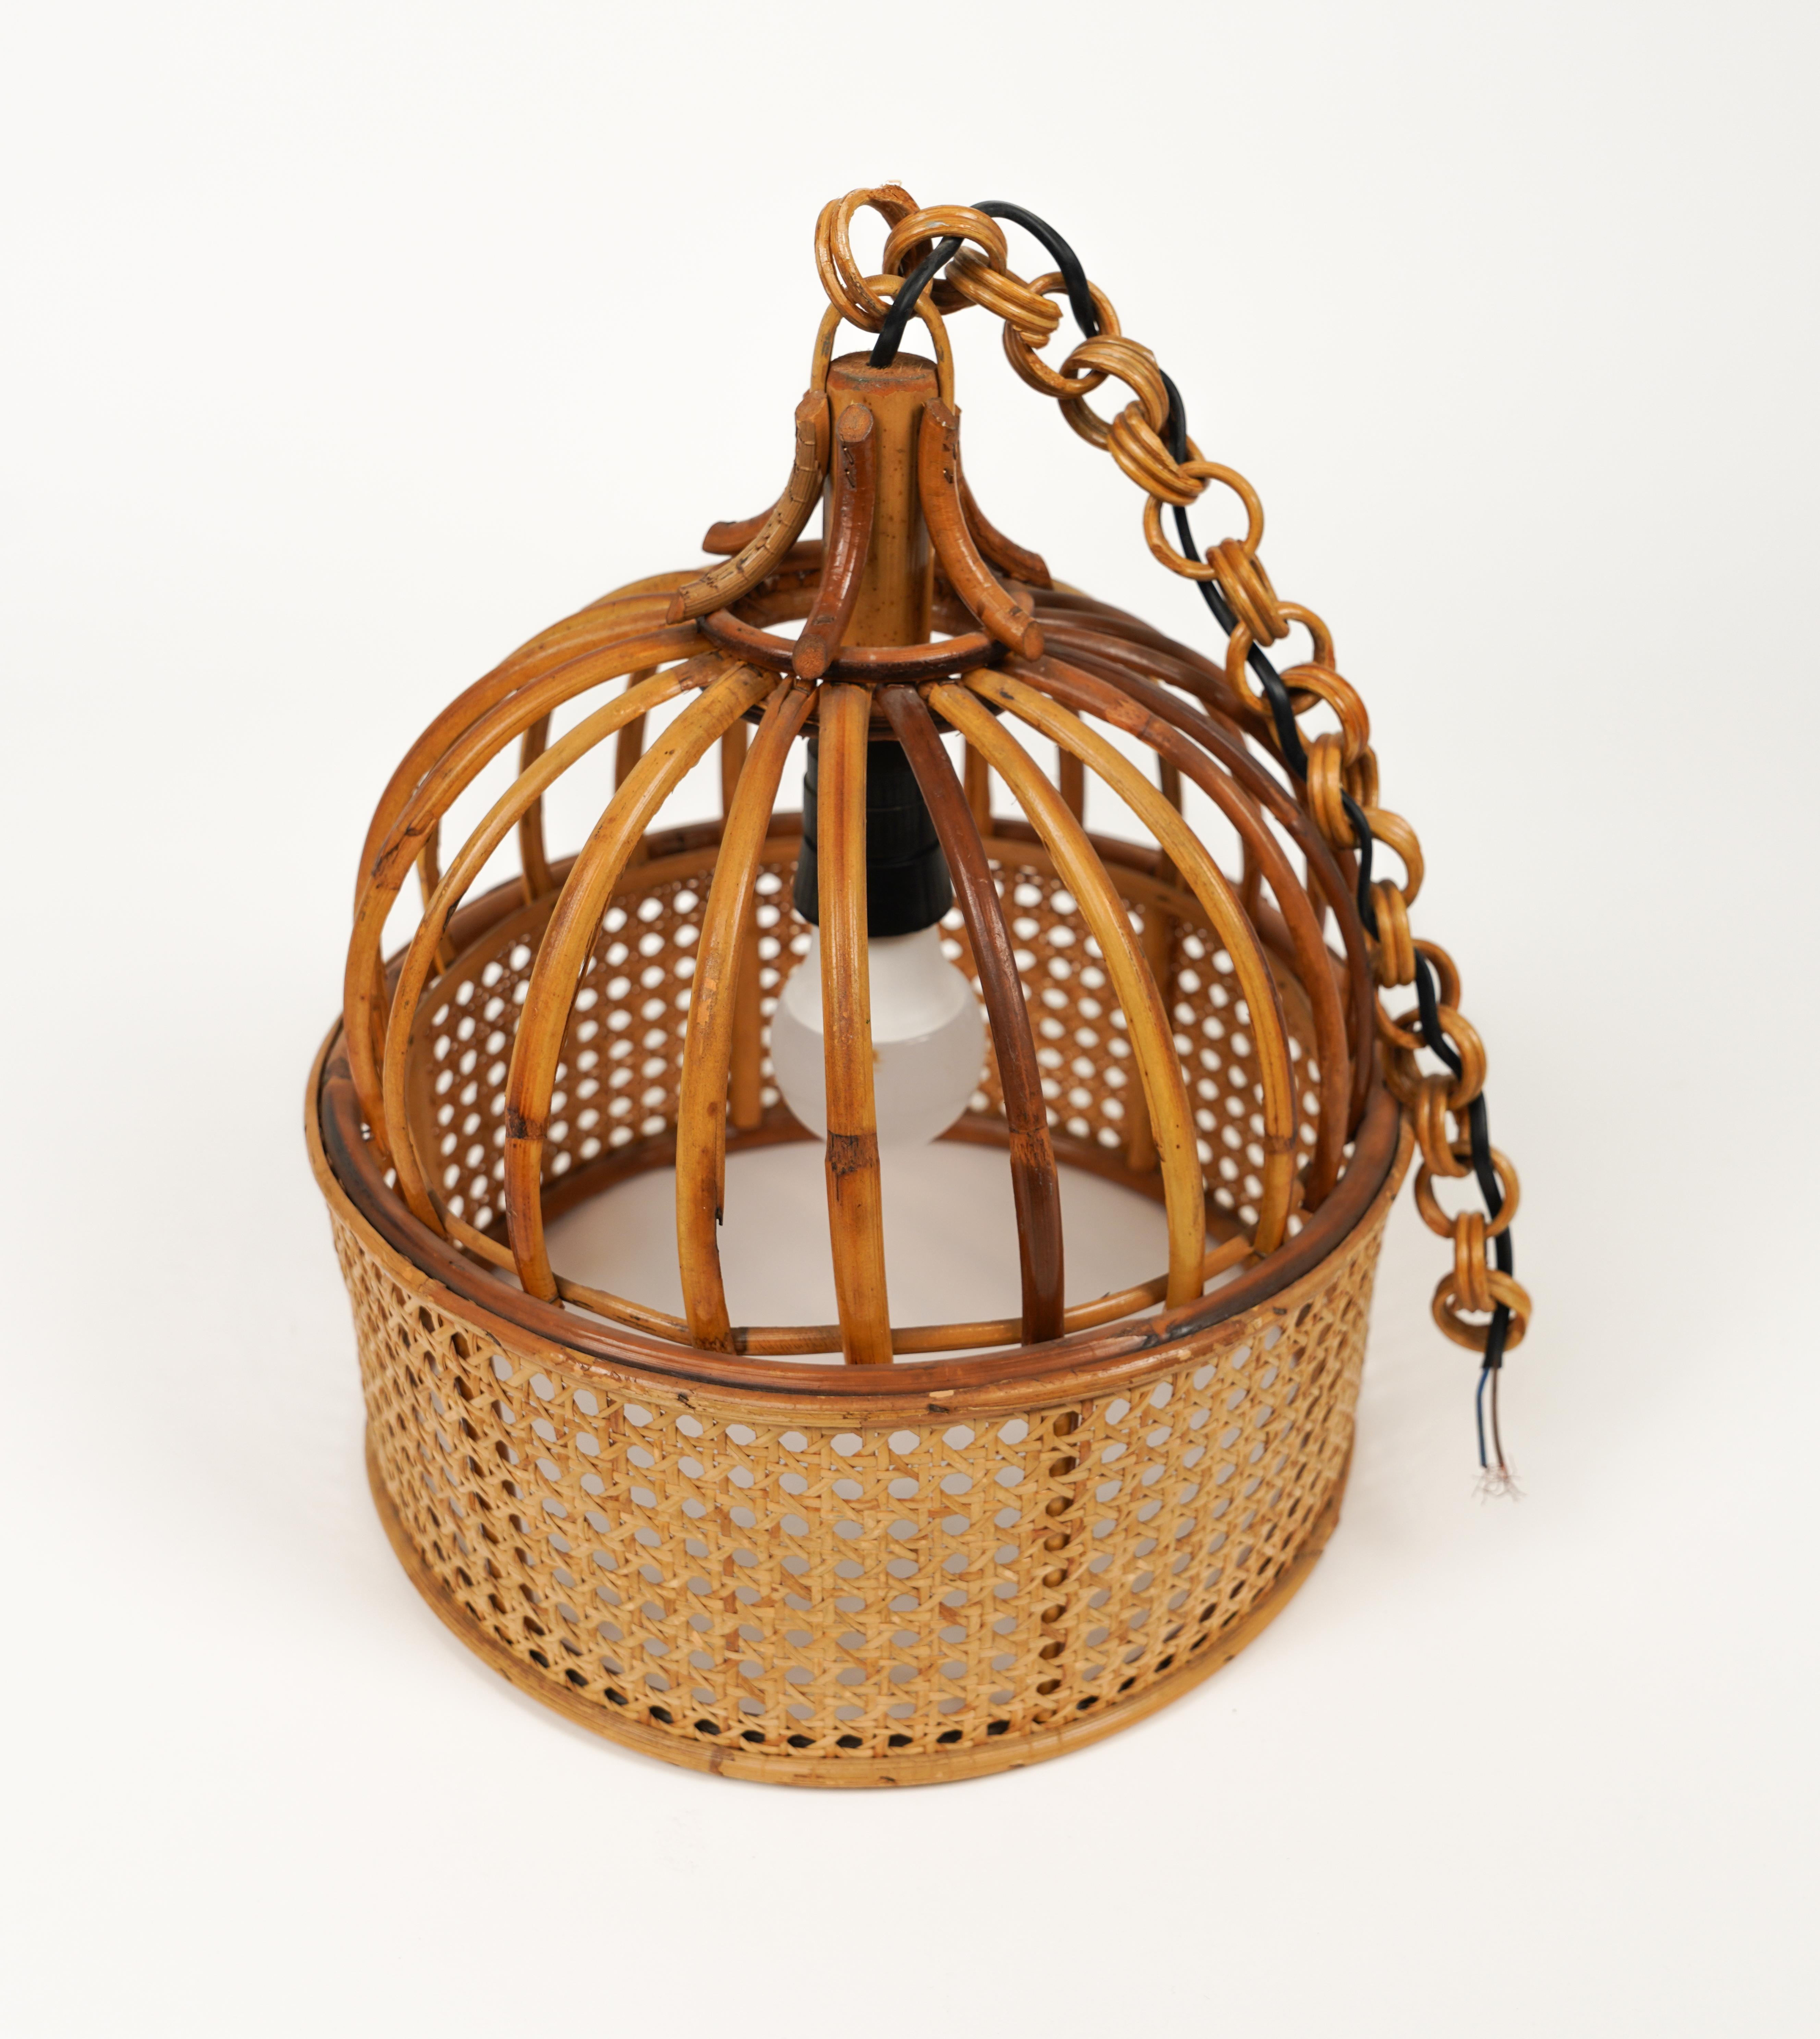 Midcentury French Riviera Rattan and Wicker Chandelier, Italy 1970s For Sale 3